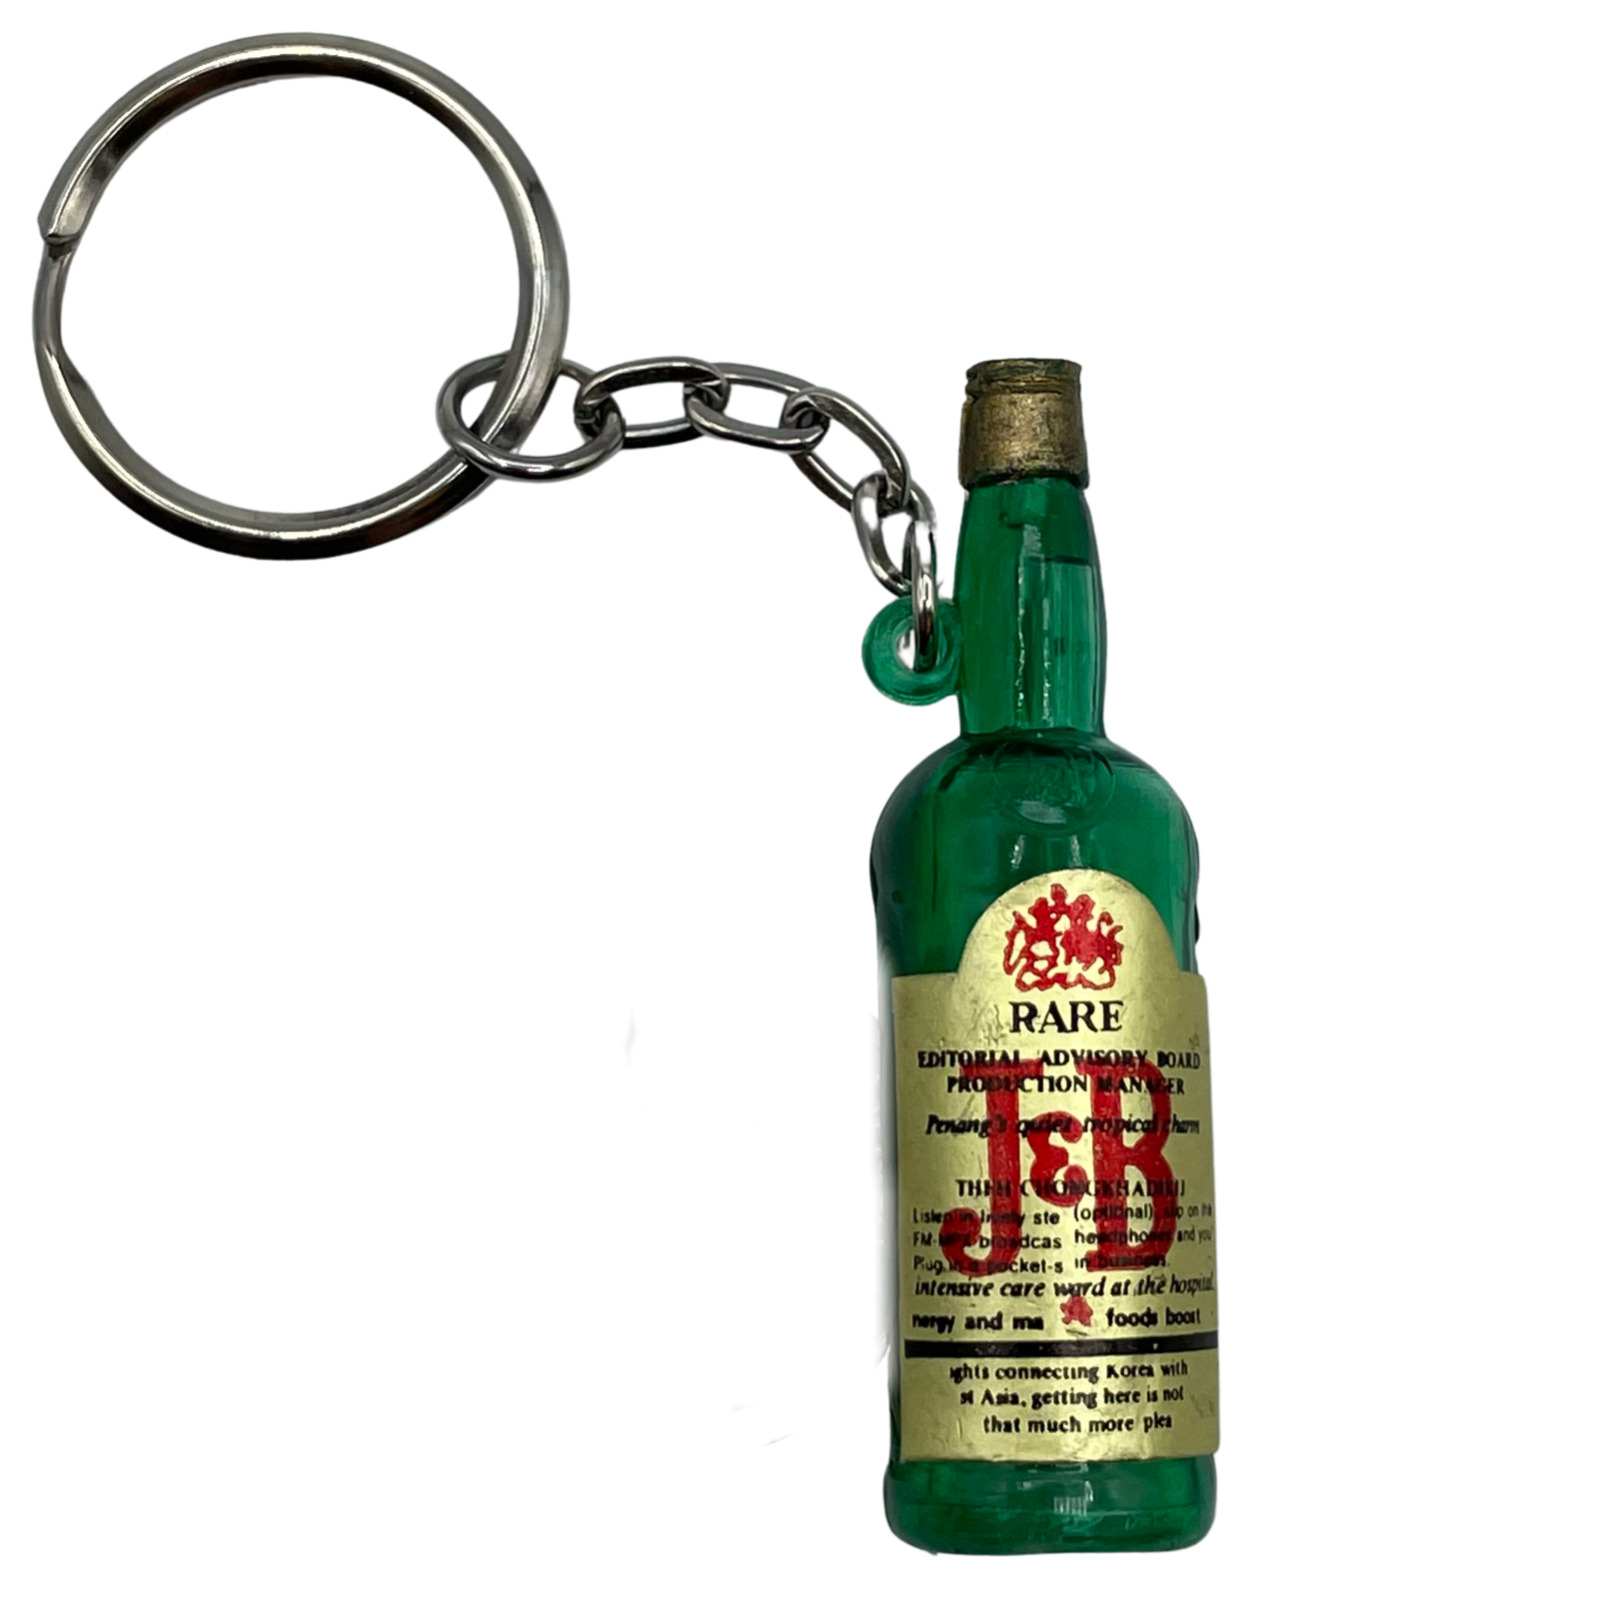 Vintage J&B SCOTCH WHISKY Plastic Bottle Charm Keychain - SEE CONDITION